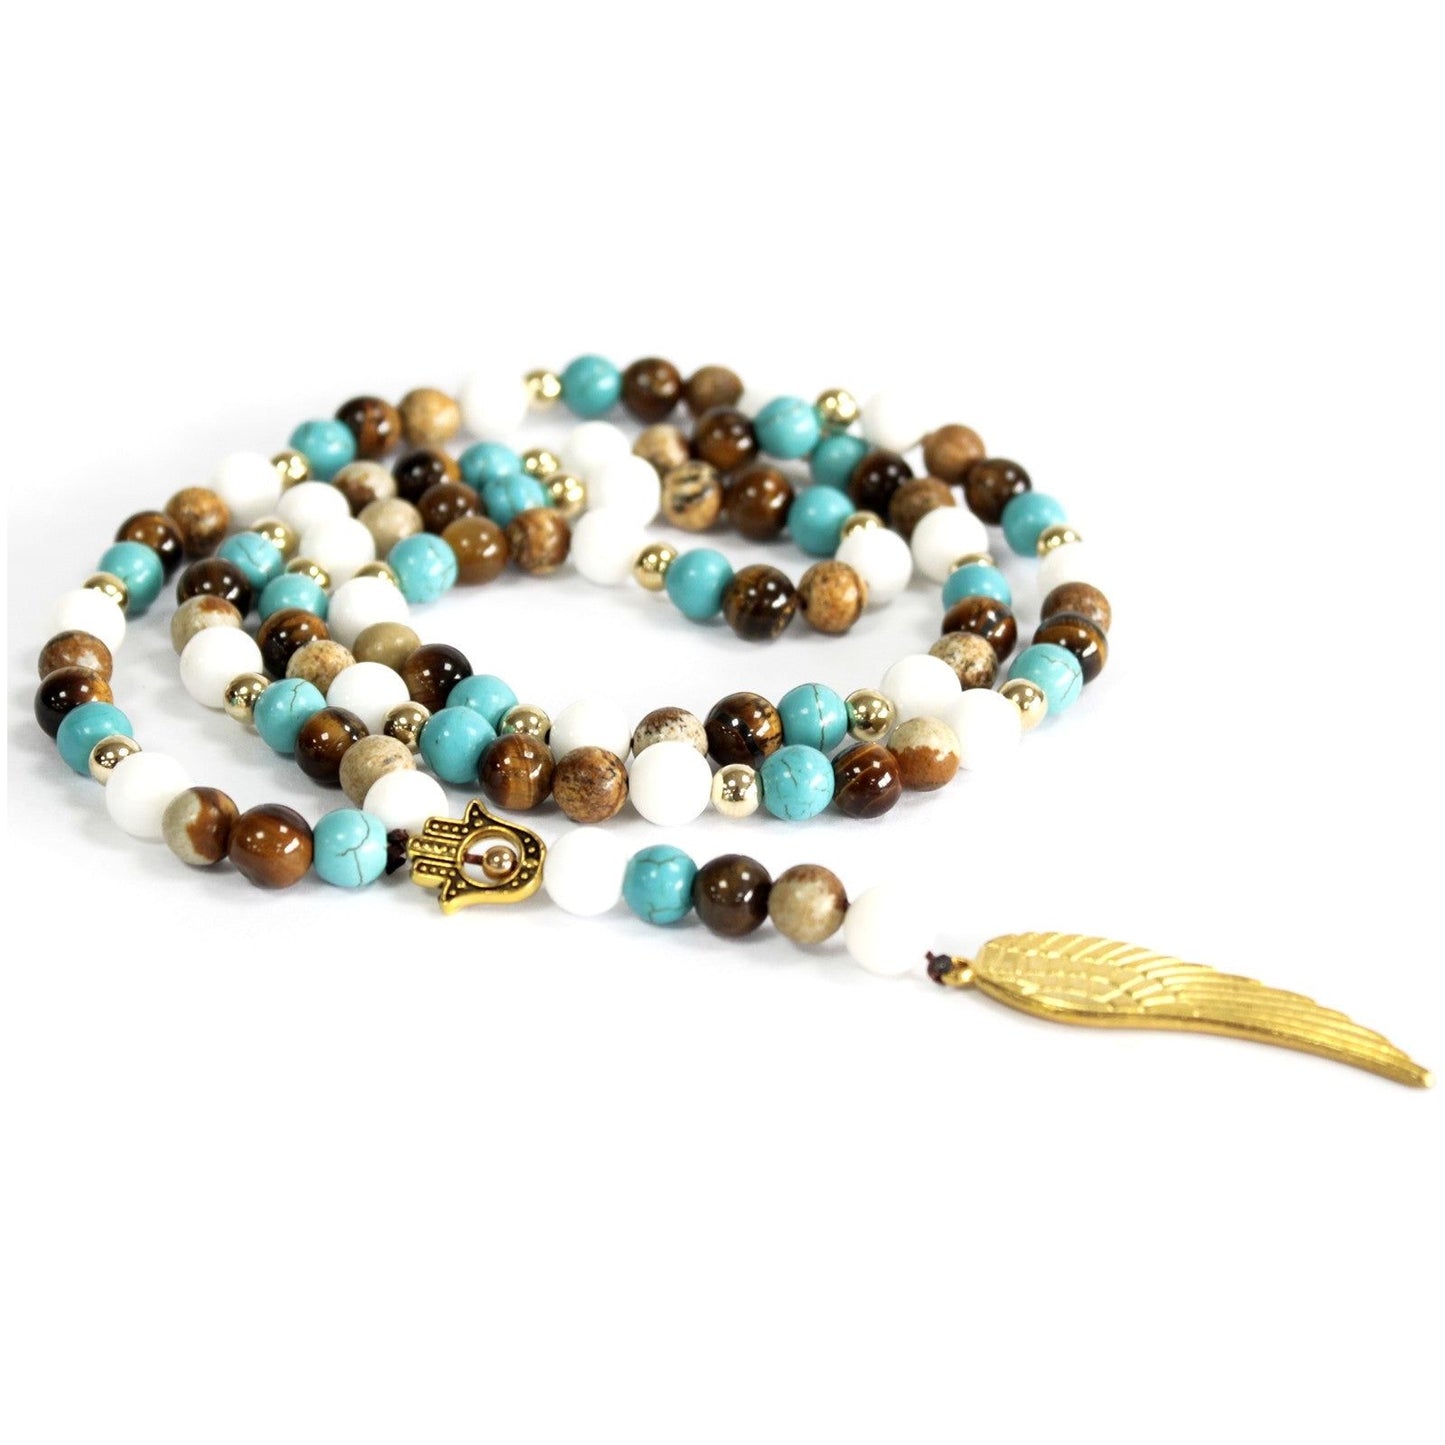 Angel Wing / Multi Beads Gemstone Necklace - Ashton and Finch